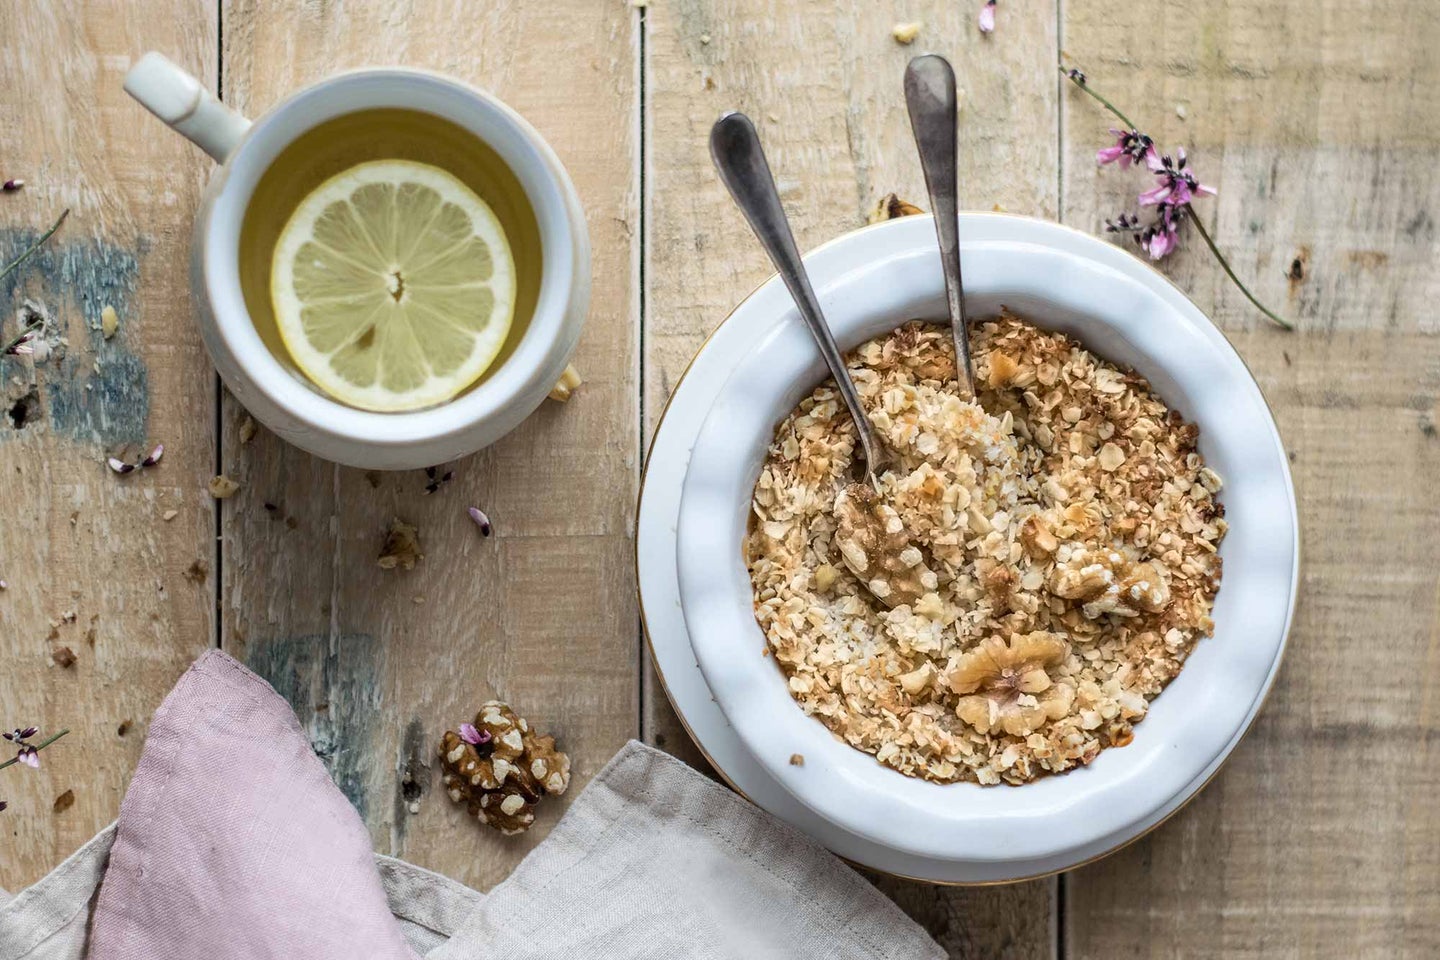 Bowl of oatmeal and cup of tea with lemon.